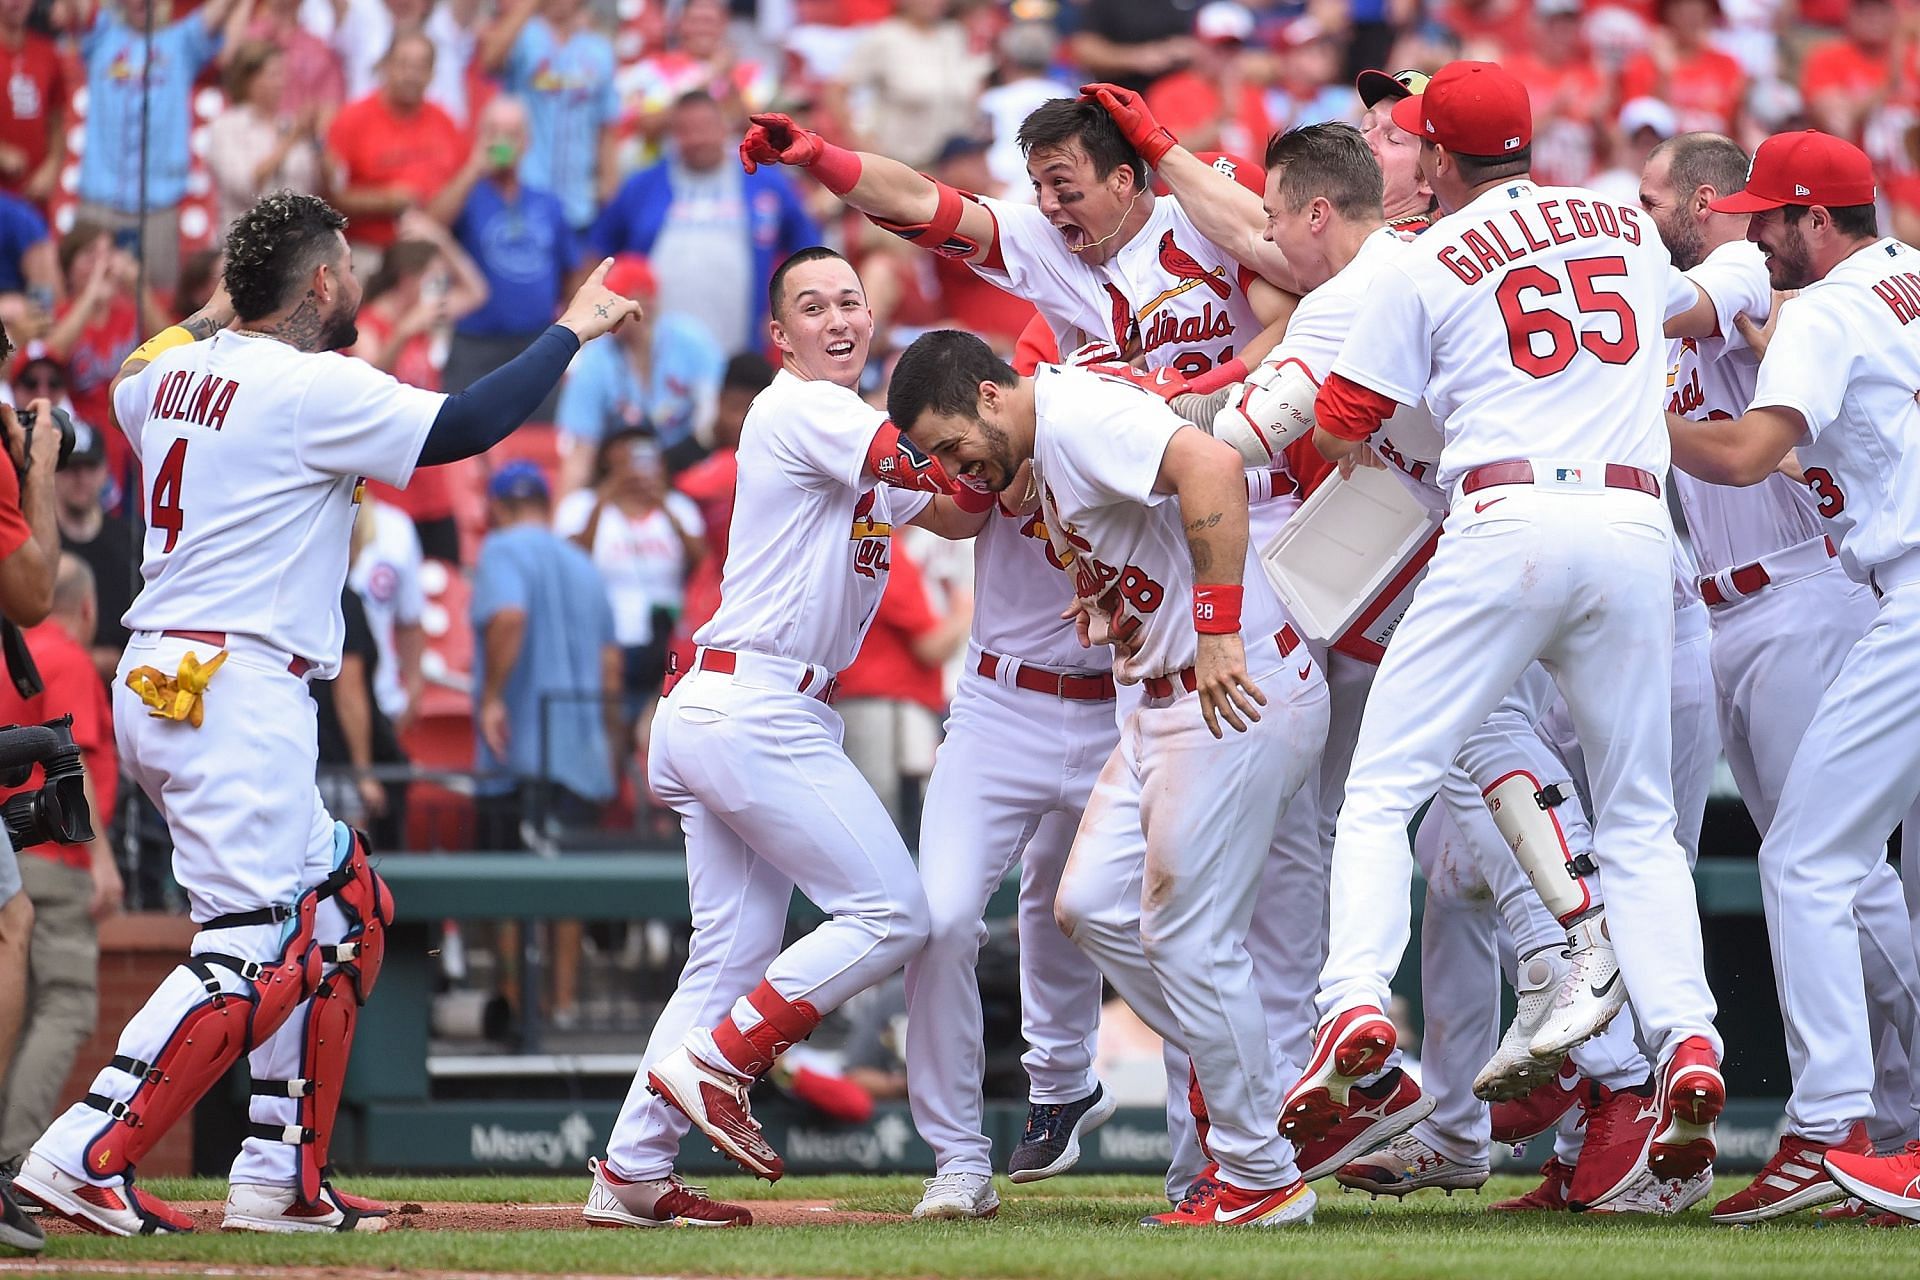 St. Louis Cardinals on X: Your 2022 NL Central Champions! #STLCards